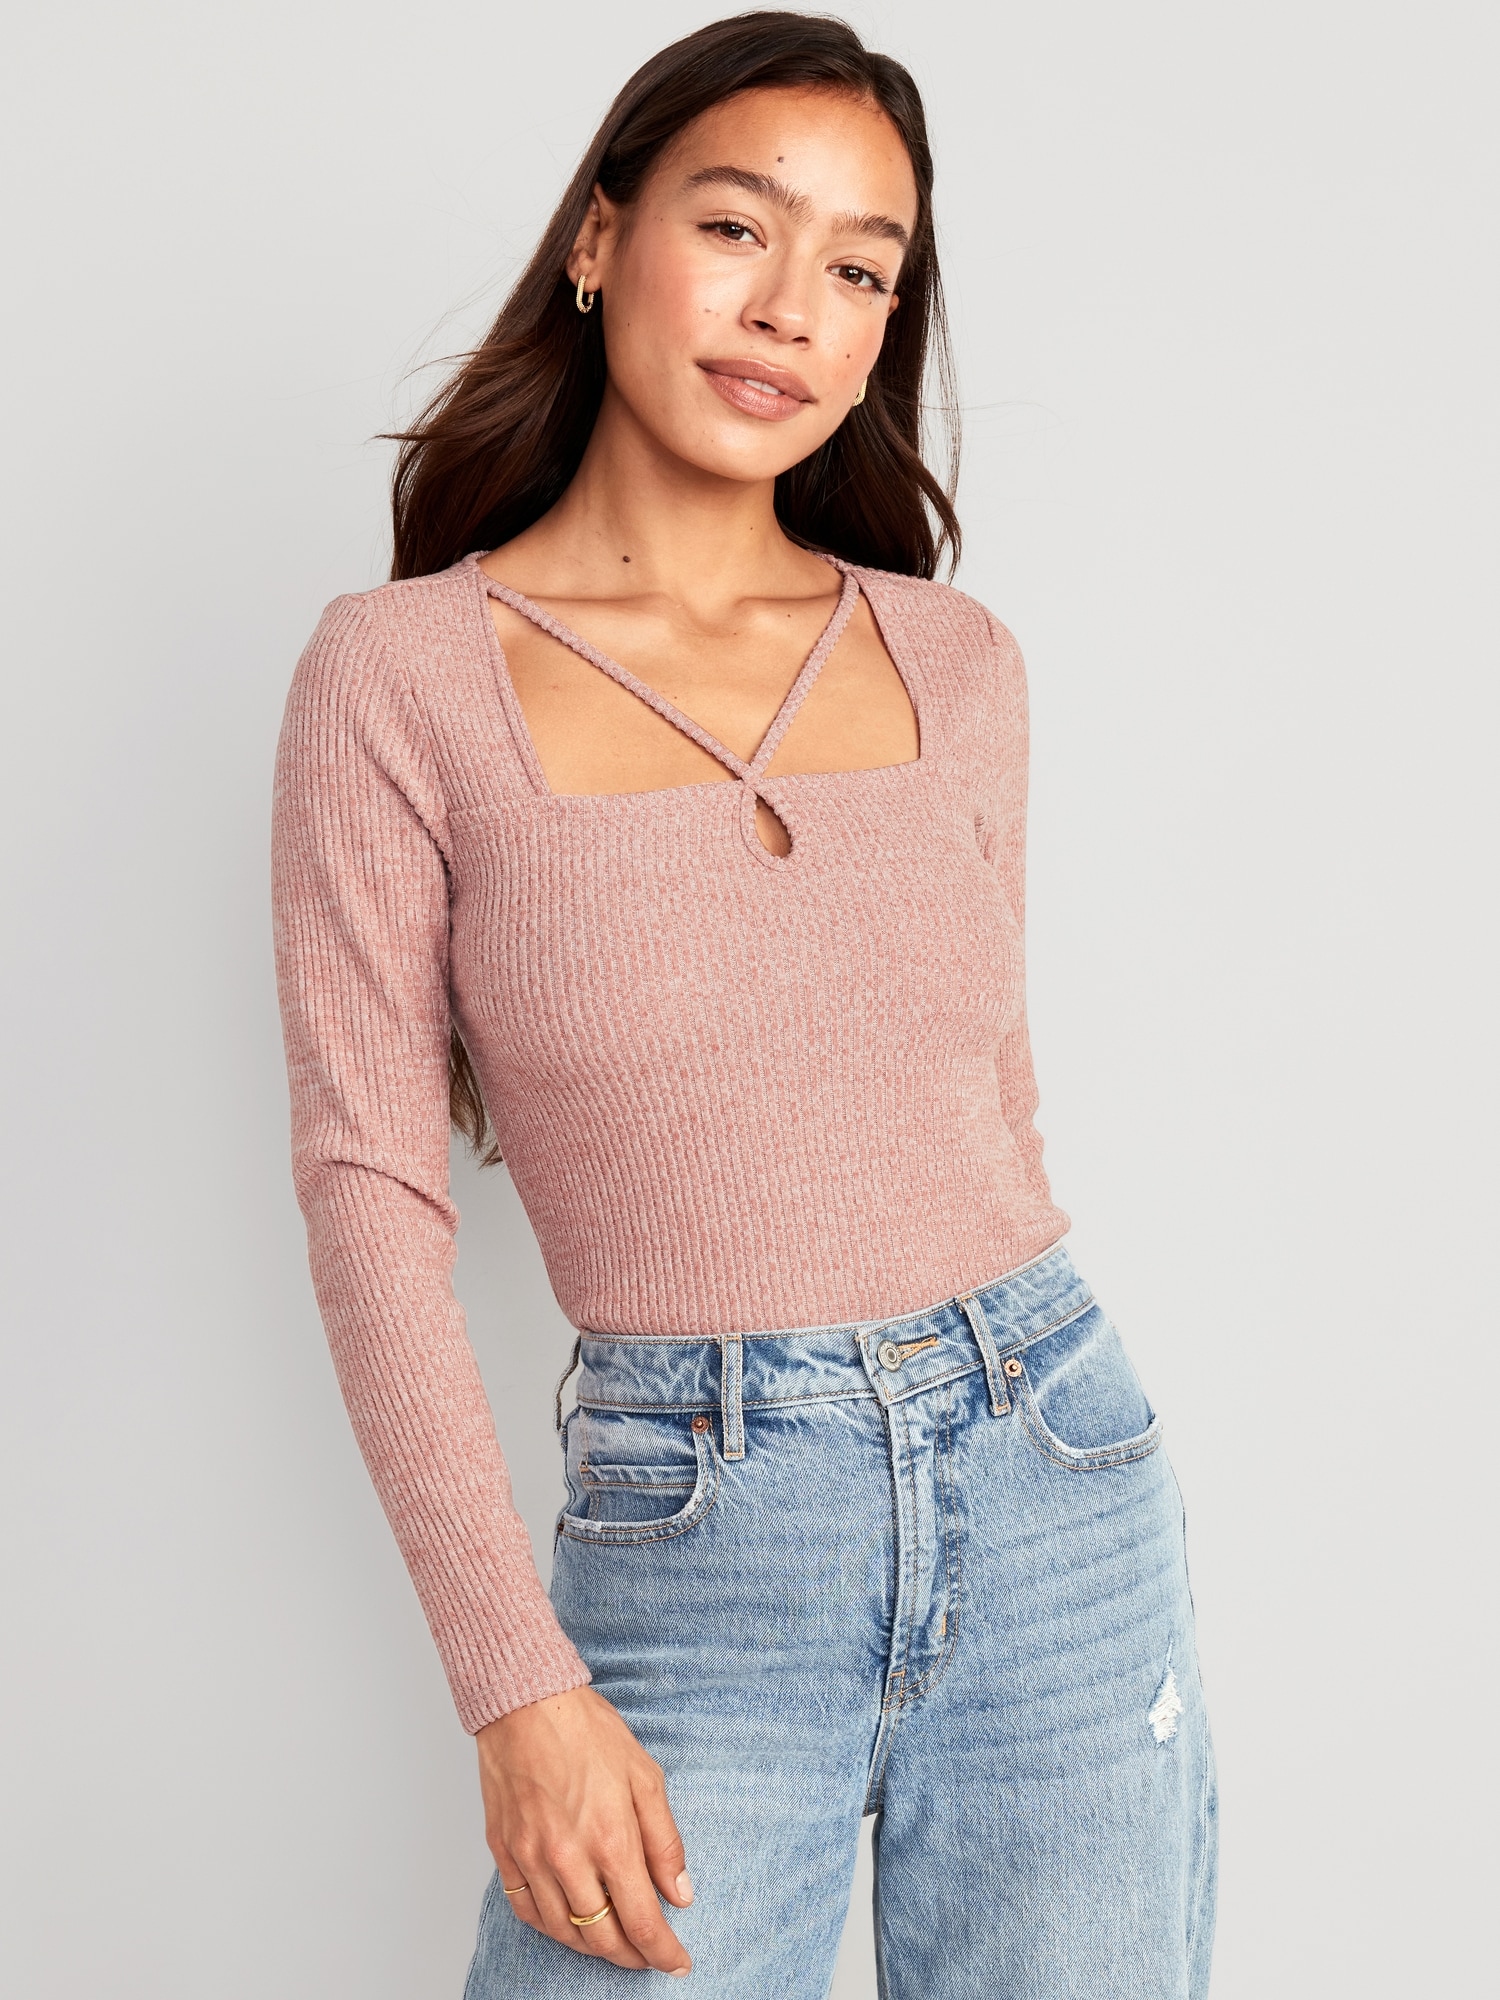 Pink Crop Top Long Sleeve Square Neck